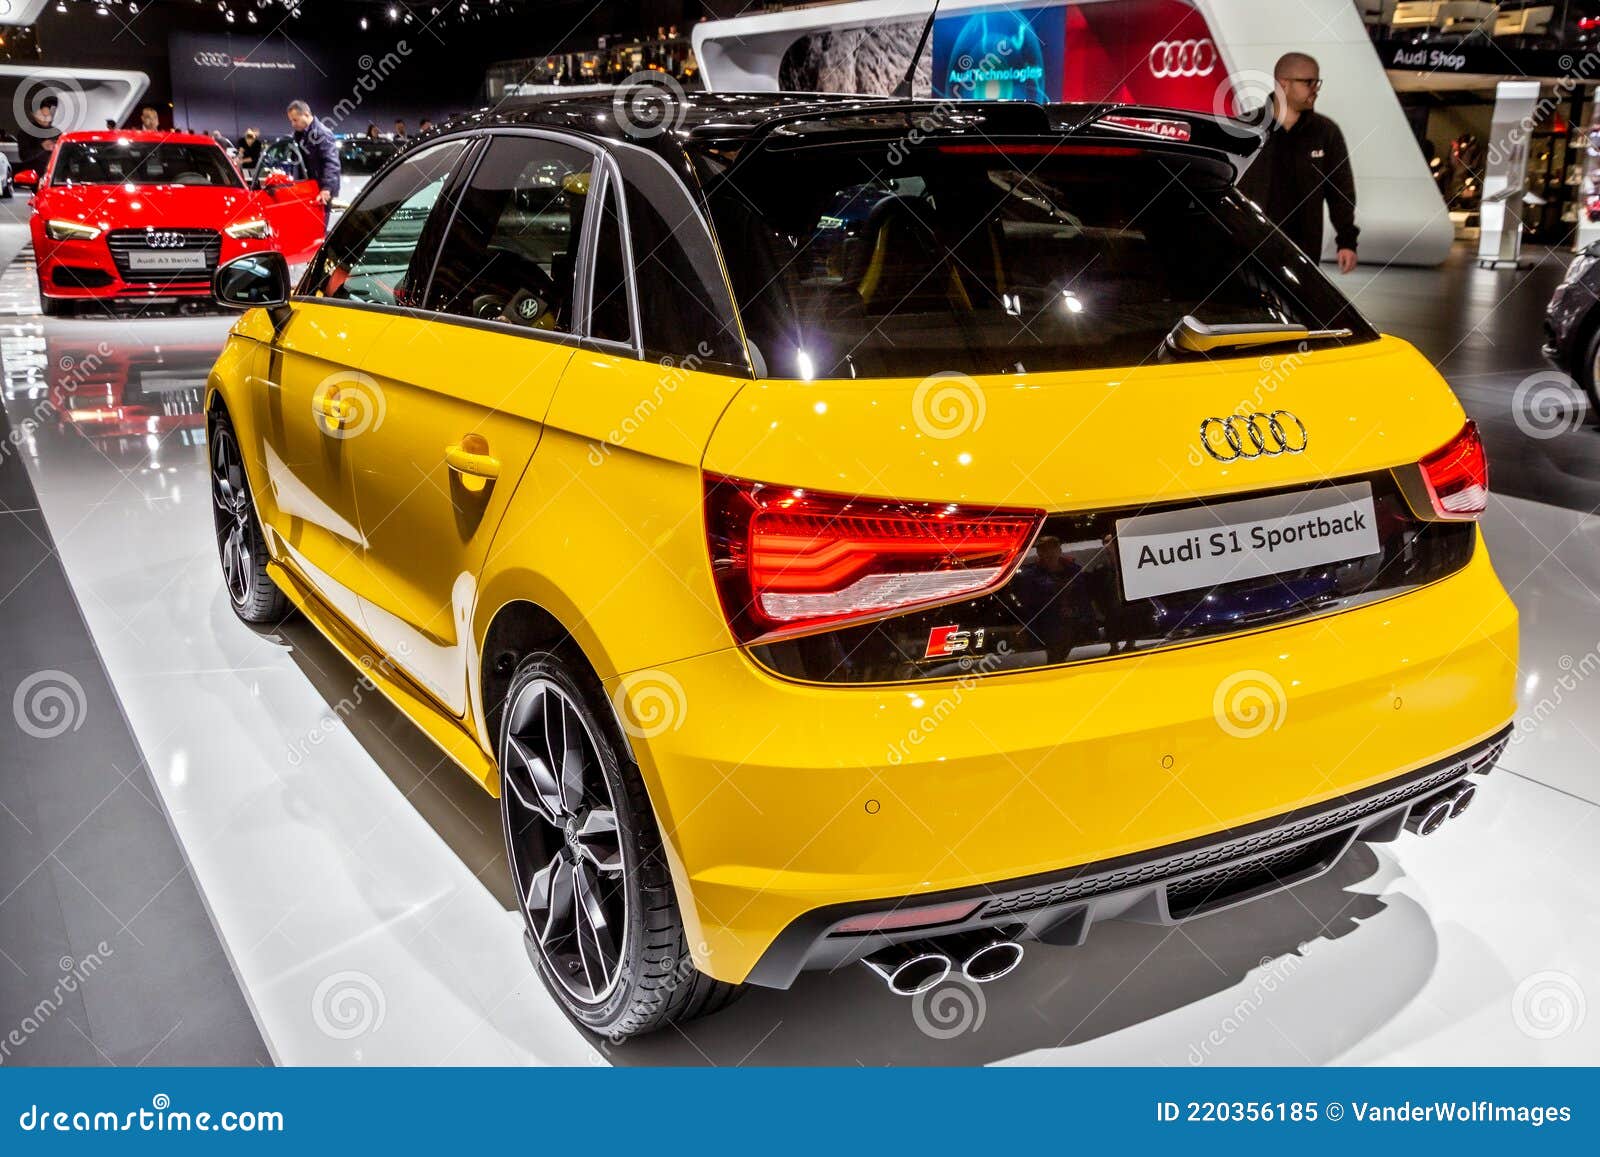 Audi S1 Sportback Car Showcased at the Brussels Expo Autosalon